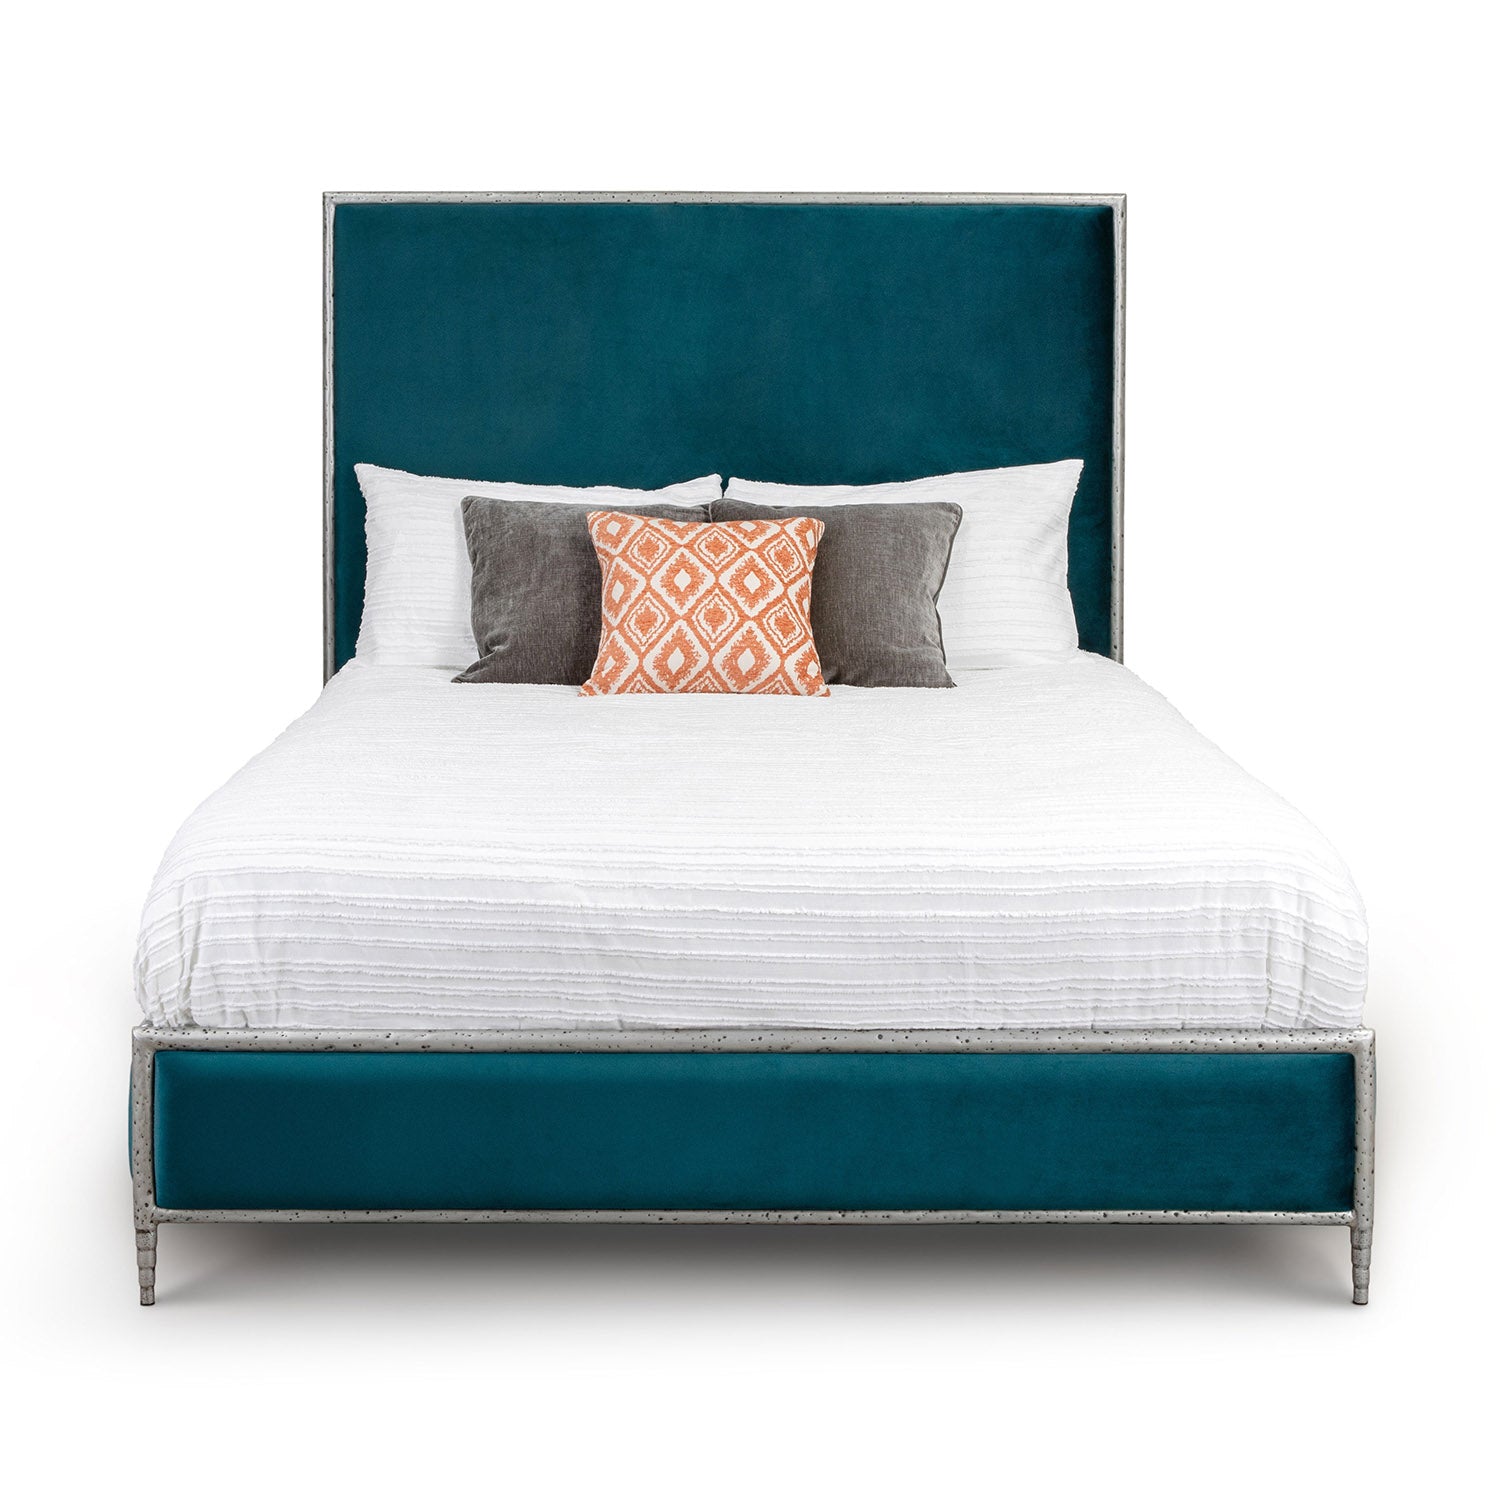 Wesley Allen Royce Surround Bed in Royal Teal and Hamerred Silver Finish.